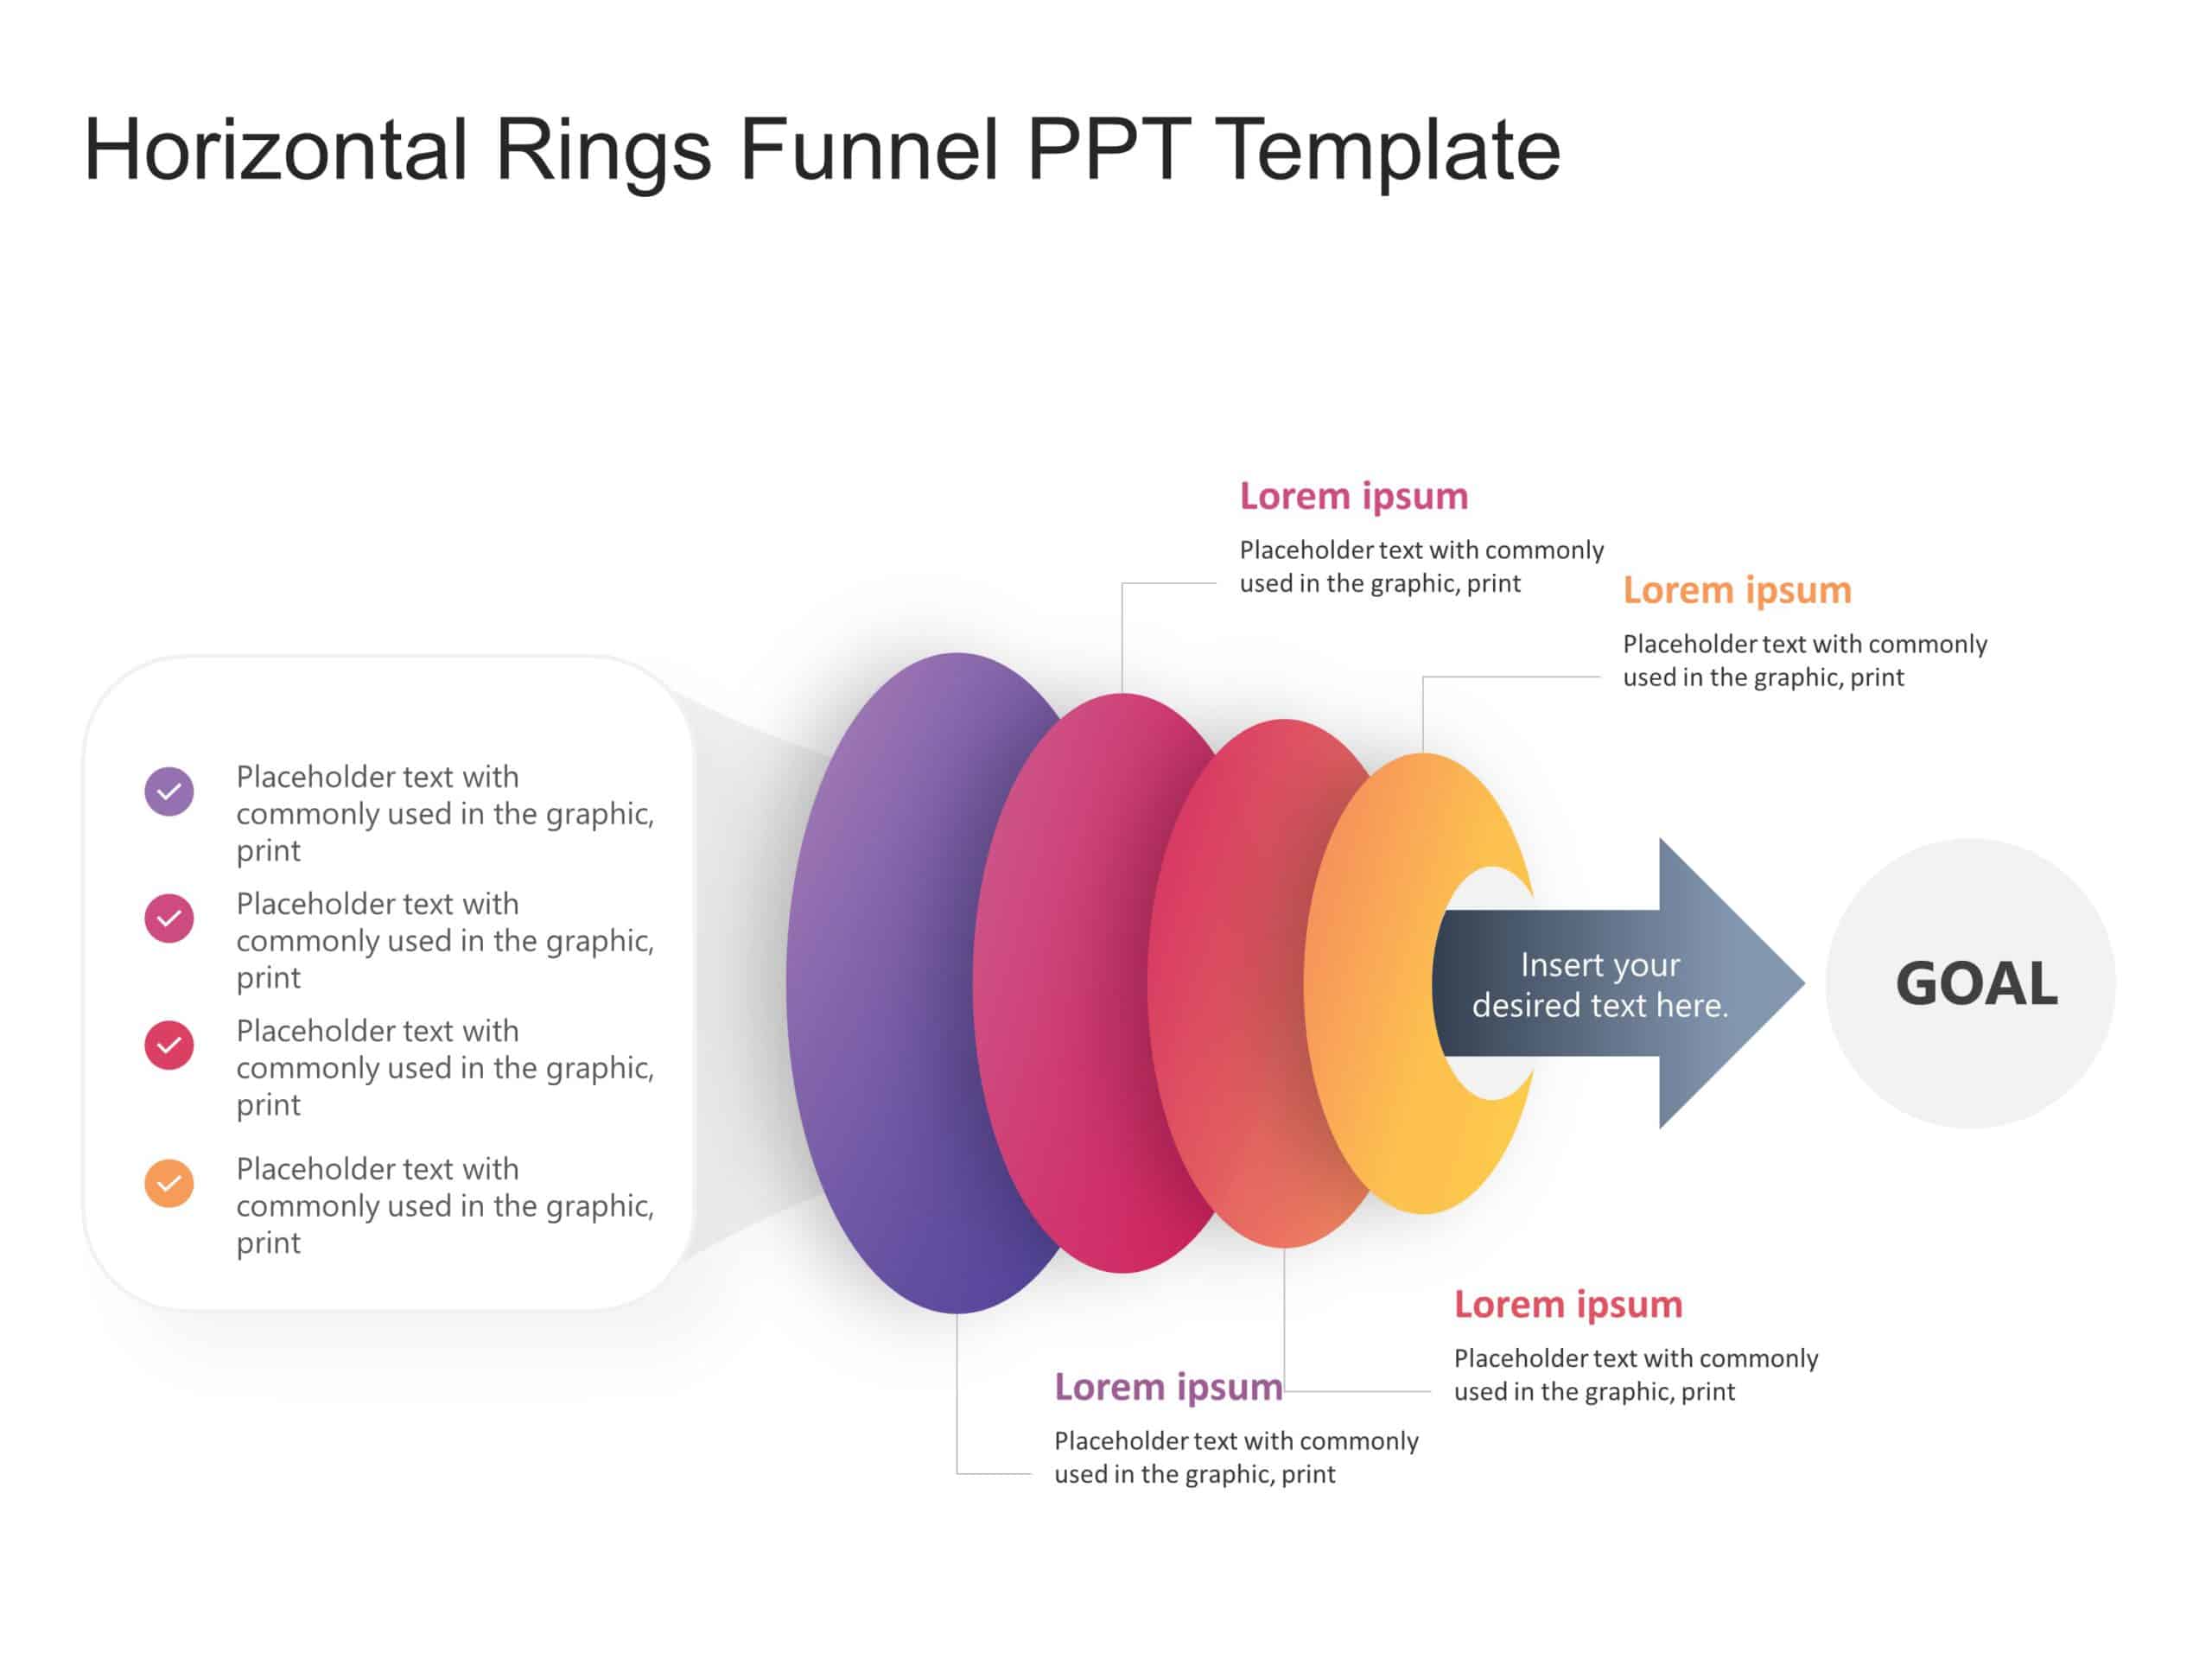 Horizontal Rings Funnel PPT Template